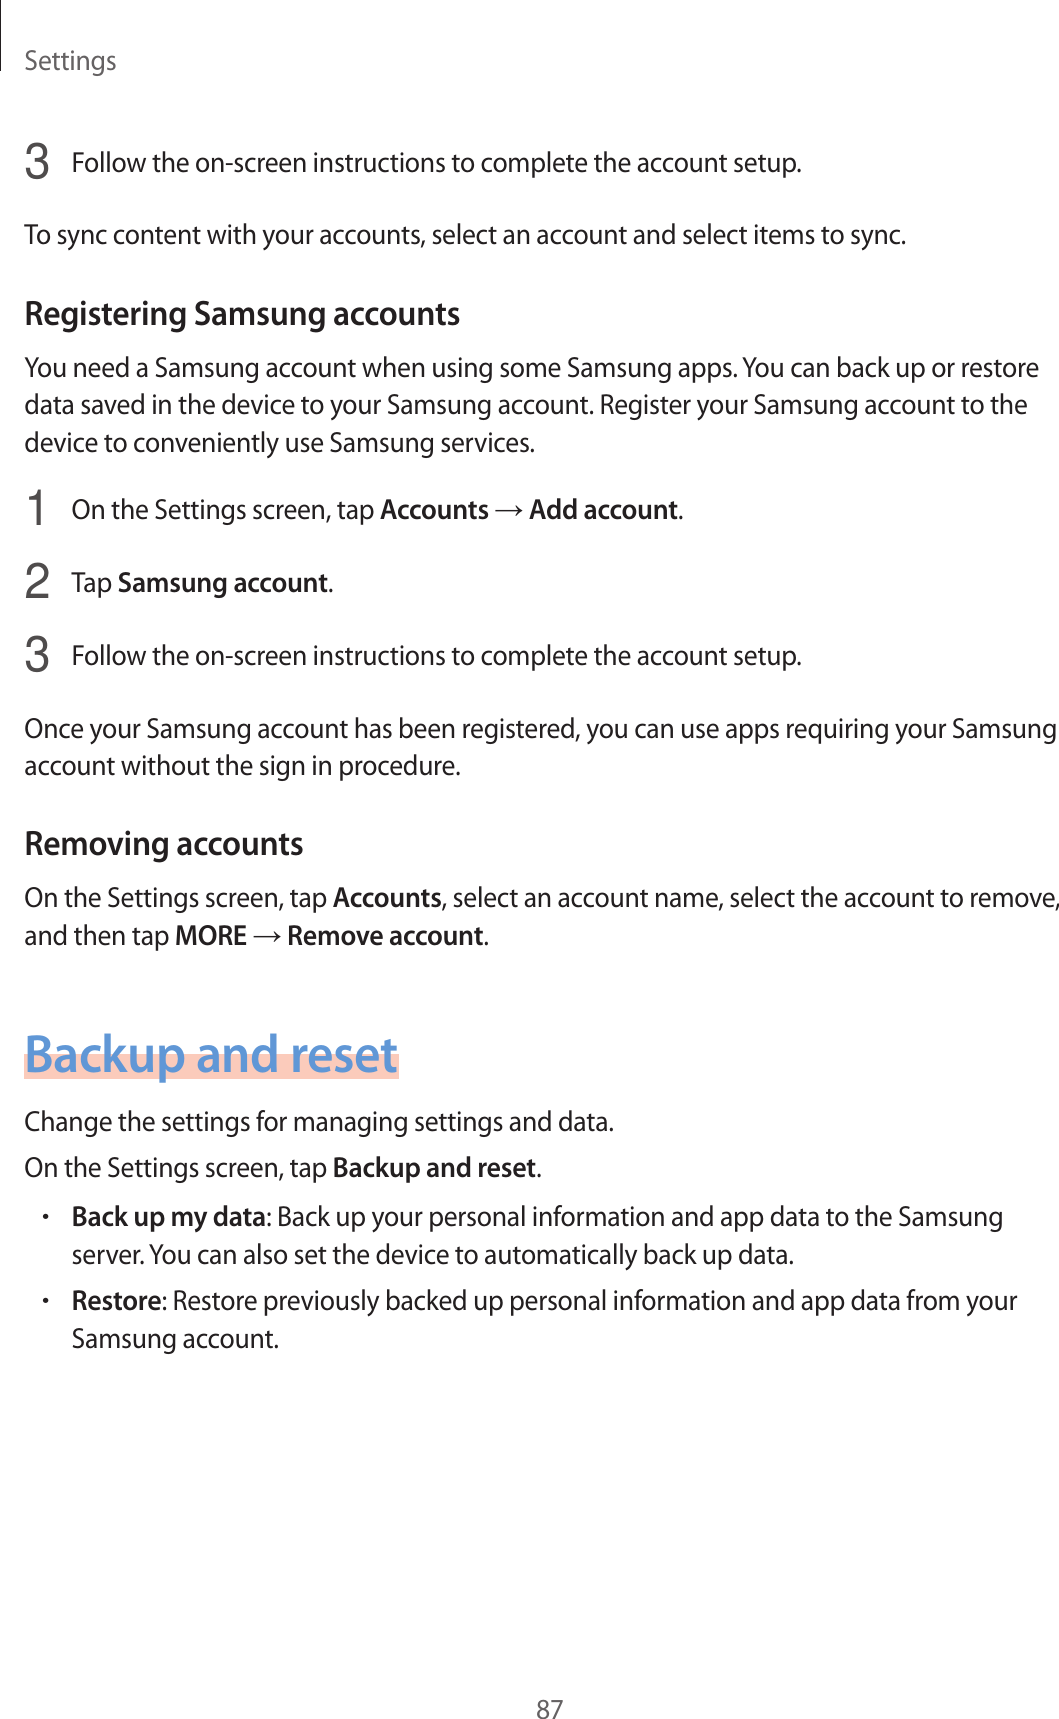 Settings873  Follow the on-screen instructions to complete the account setup.To sync content with your accounts, select an account and select items to sync.Registering Samsung accountsYou need a Samsung account when using some Samsung apps. You can back up or restore data saved in the device to your Samsung account. Register your Samsung account to the device to conveniently use Samsung services.1  On the Settings screen, tap Accounts → Add account.2  Tap Samsung account.3  Follow the on-screen instructions to complete the account setup.Once your Samsung account has been registered, you can use apps requiring your Samsung account without the sign in procedure.Removing accountsOn the Settings screen, tap Accounts, select an account name, select the account to remove, and then tap MORE → Remove account.Backup and resetChange the settings for managing settings and data.On the Settings screen, tap Backup and reset.•Back up my data: Back up your personal information and app data to the Samsung server. You can also set the device to automatically back up data.•Restore: Restore previously backed up personal information and app data from your Samsung account.